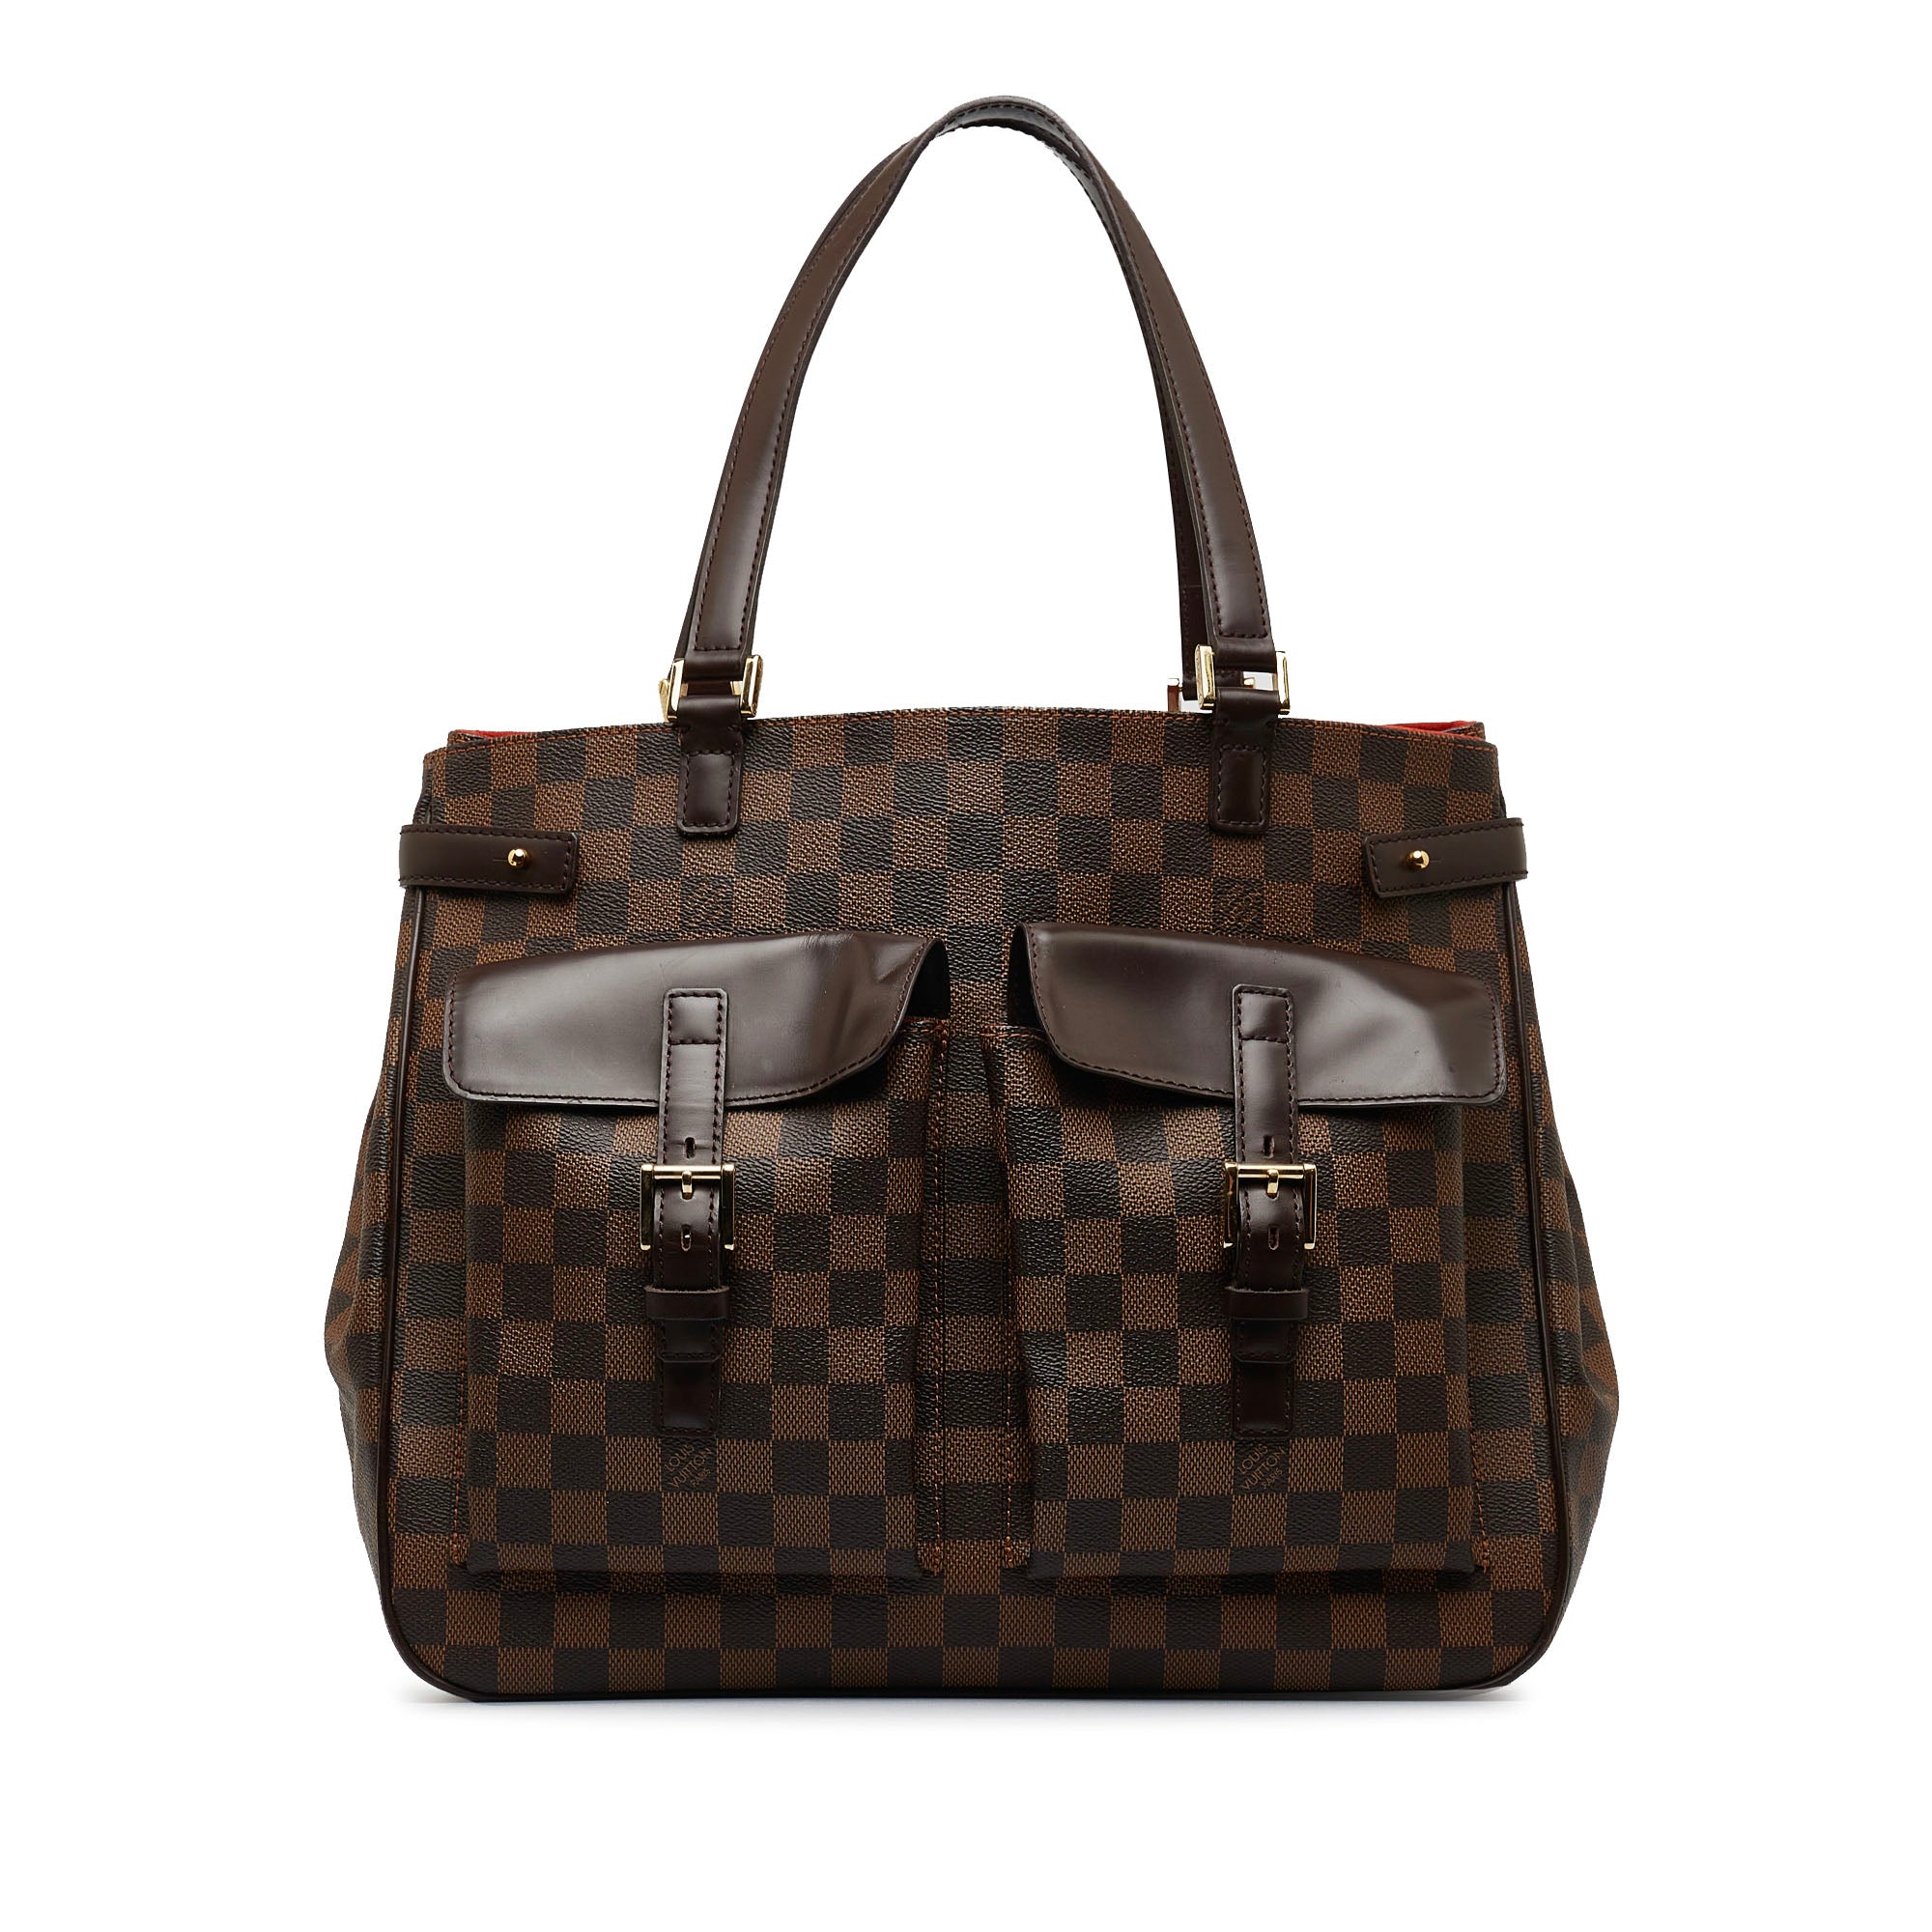 Louis Vuitton Delaware Lace- Up in Damier Embossed Leather